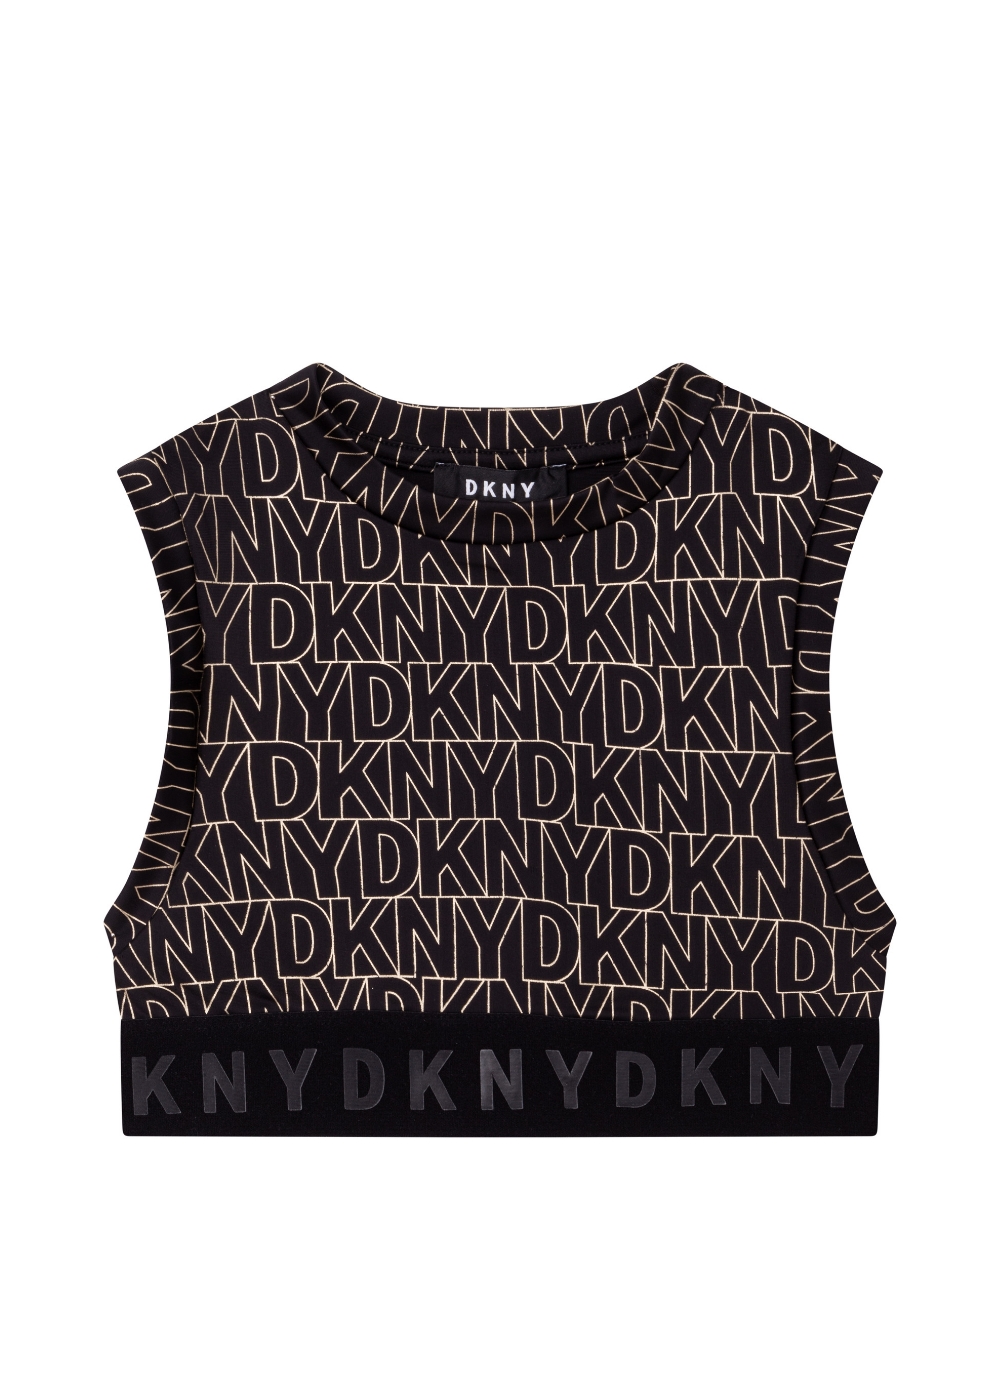 Featured image for “DKNY TOP”